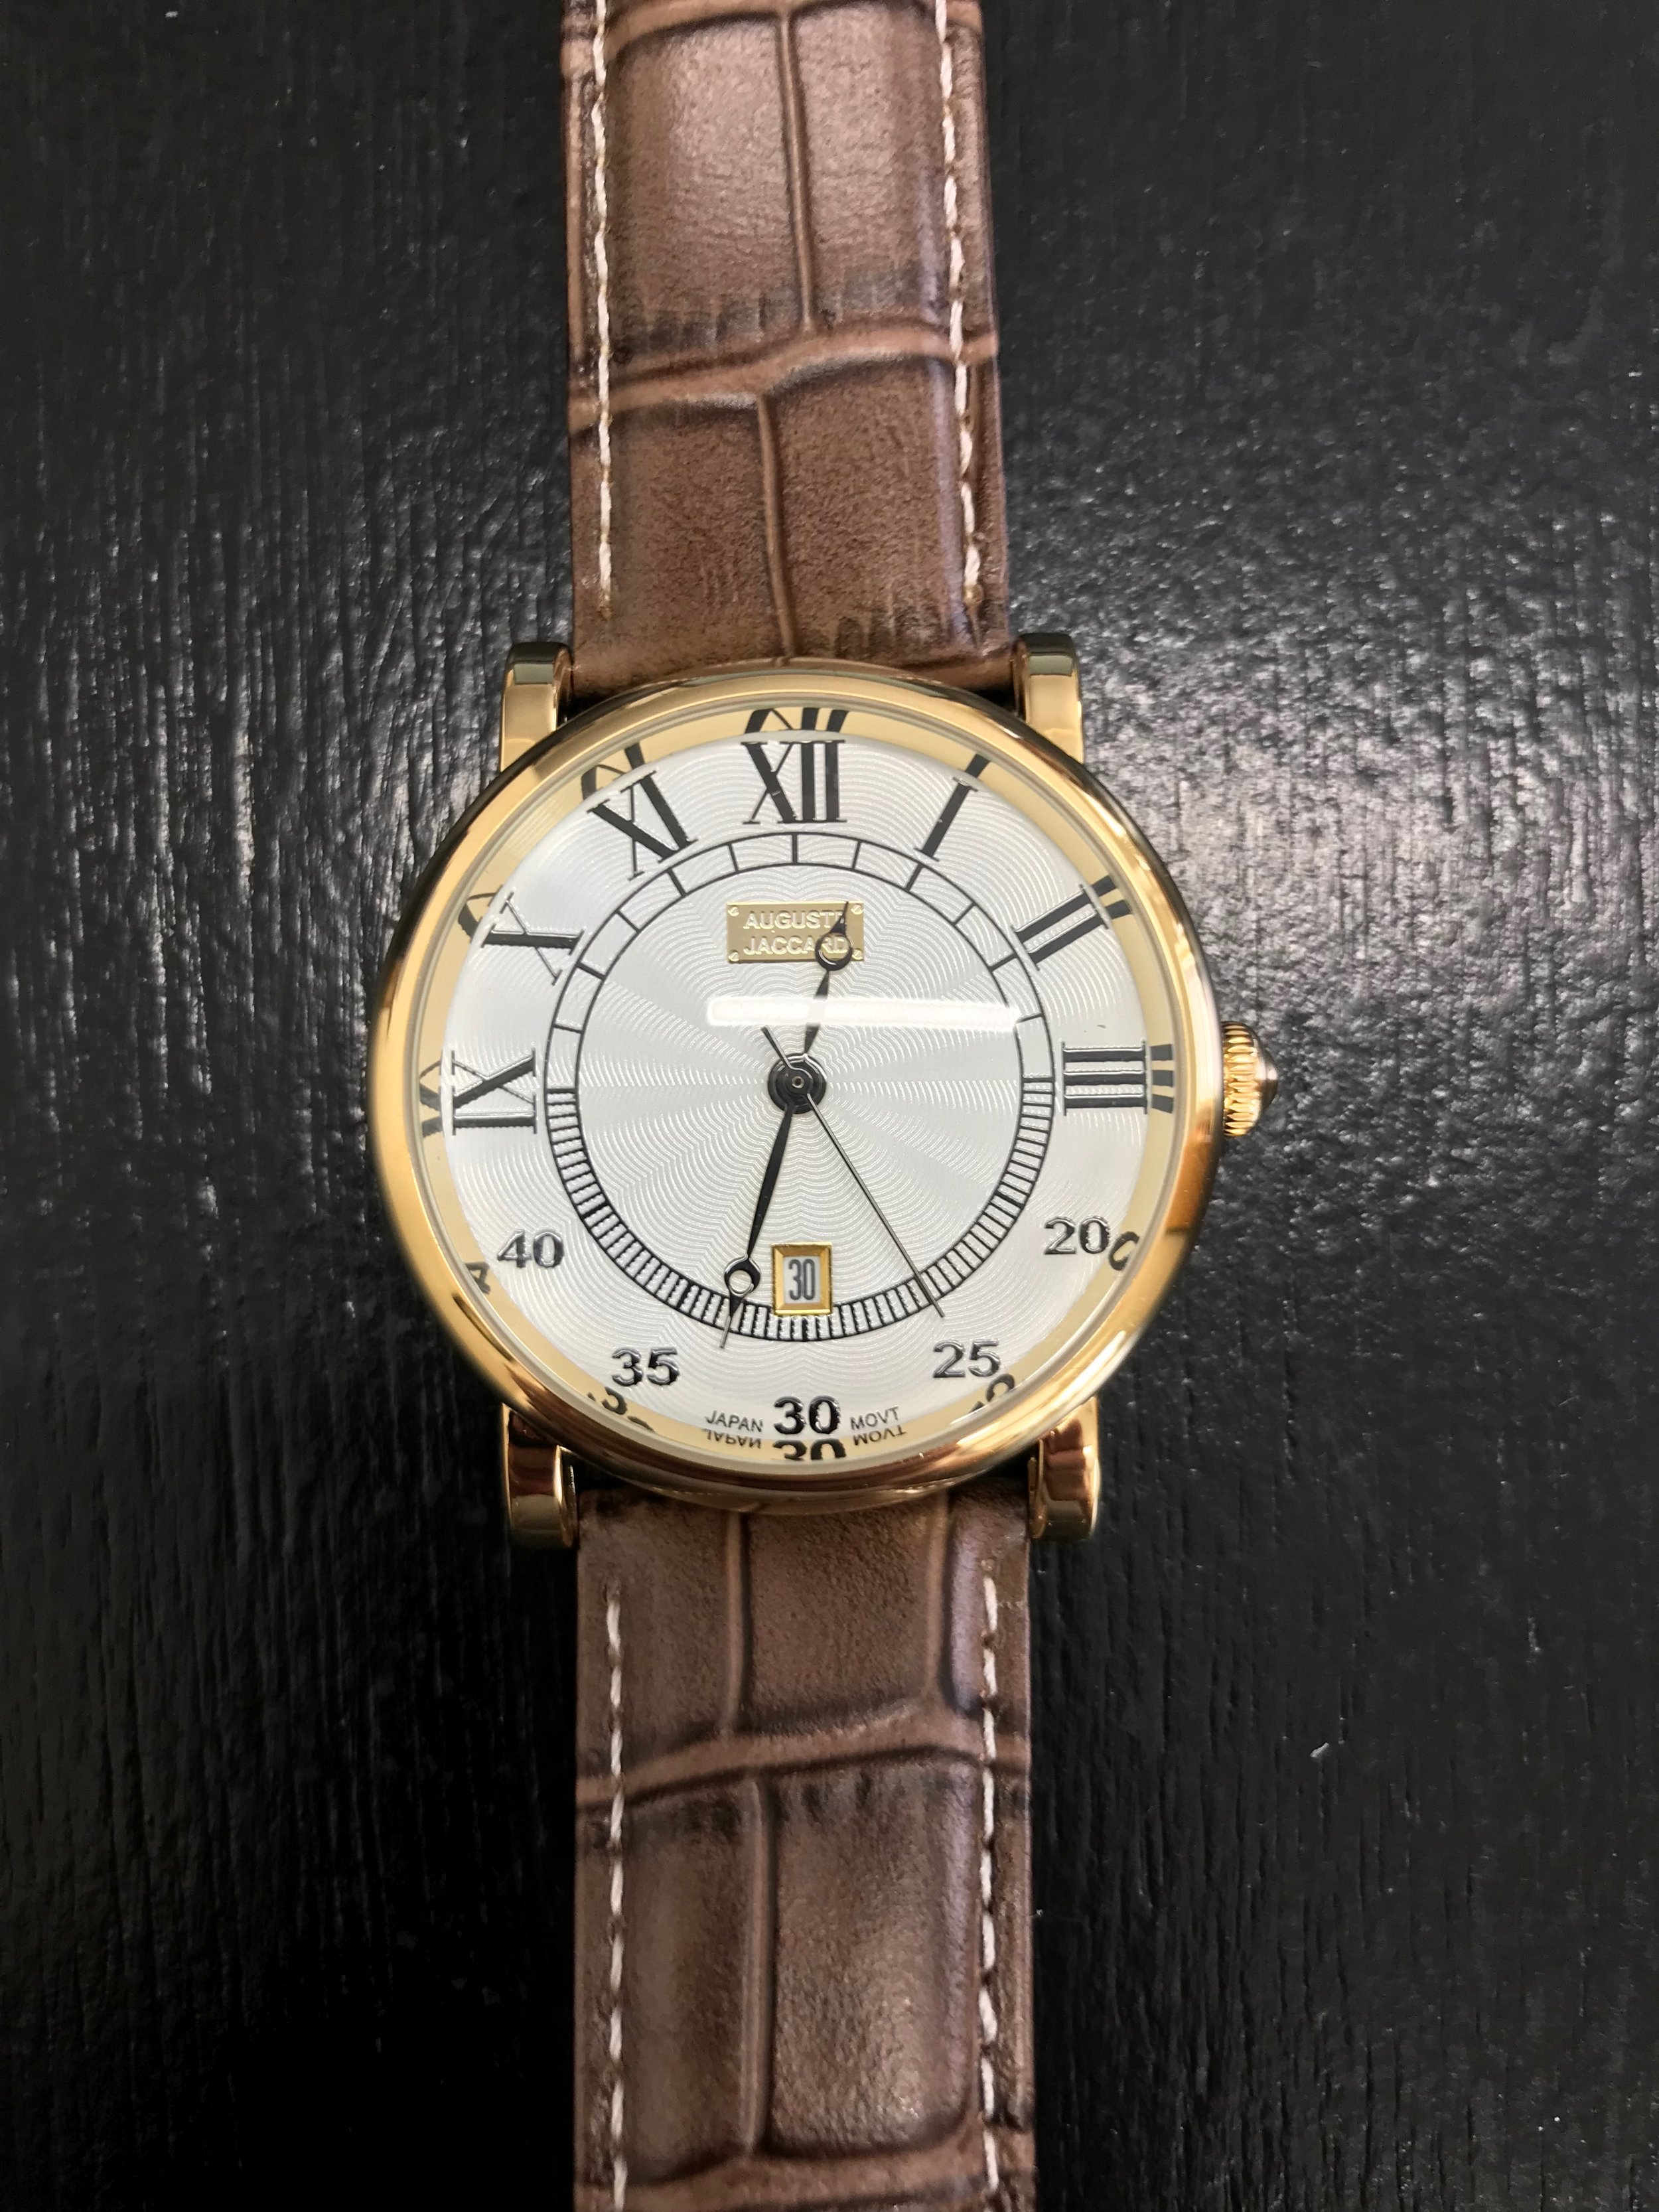 An In-Depth Review Of The Auguste Jaccard Watch From WatchGang October ...